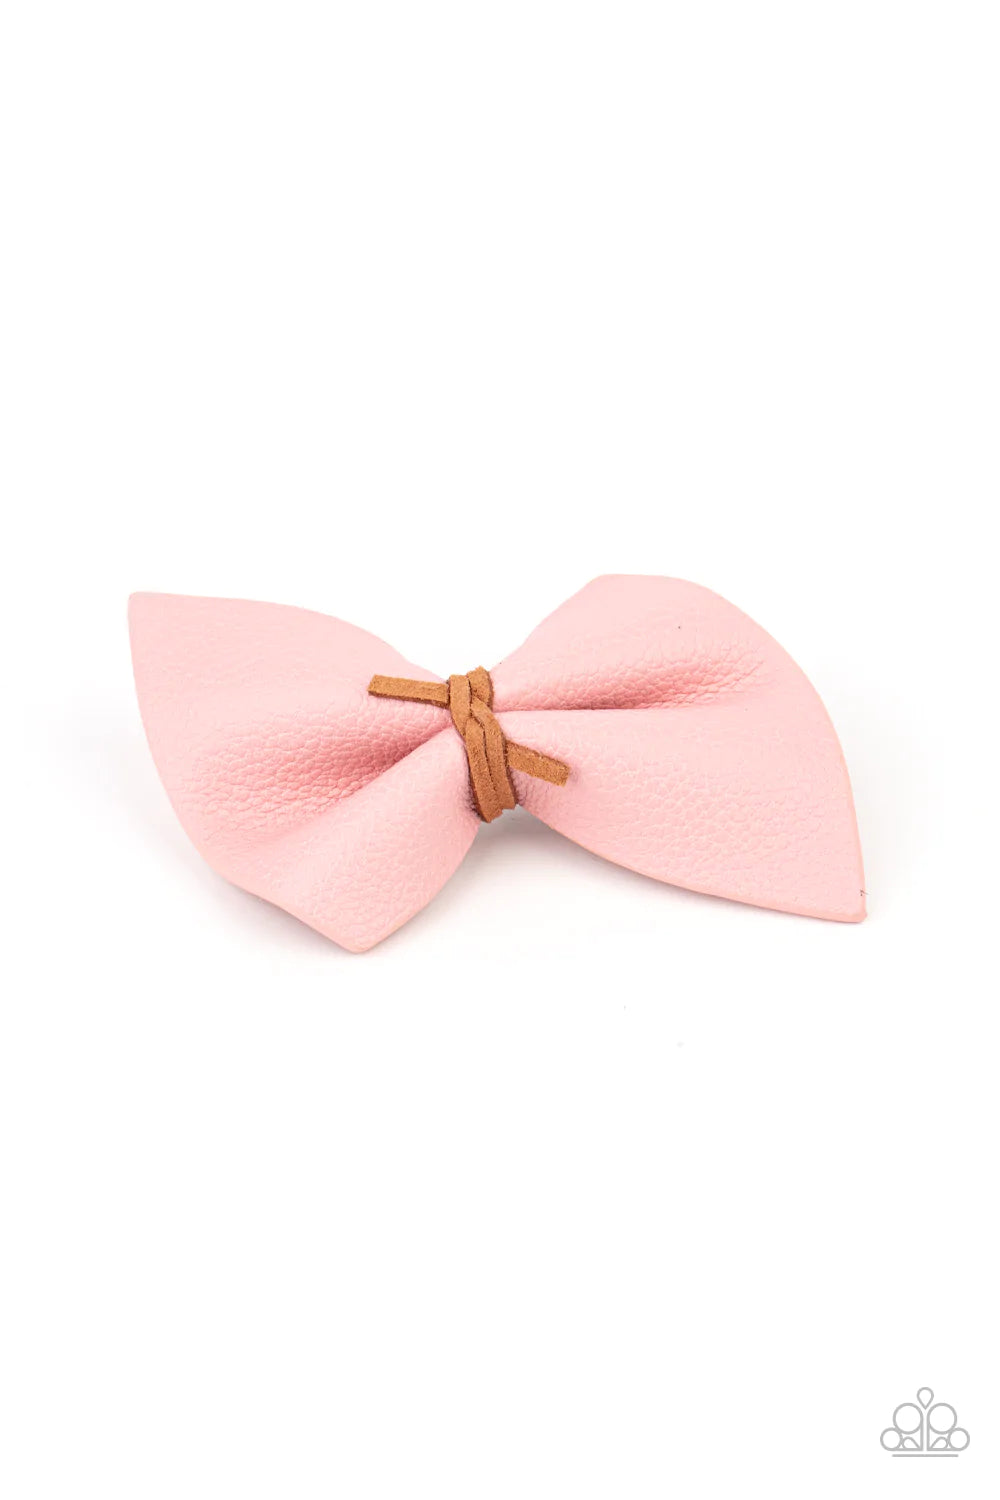 Paparazzi Accessories Home Sweet HOMESPUN - Pink Brown suede cording knots around the middle of a piece of Pale Rosette leather, creating a rustic bow. Features a standard hair clip on the back. Sold as one individual hair clip. Hair Claws & Clips